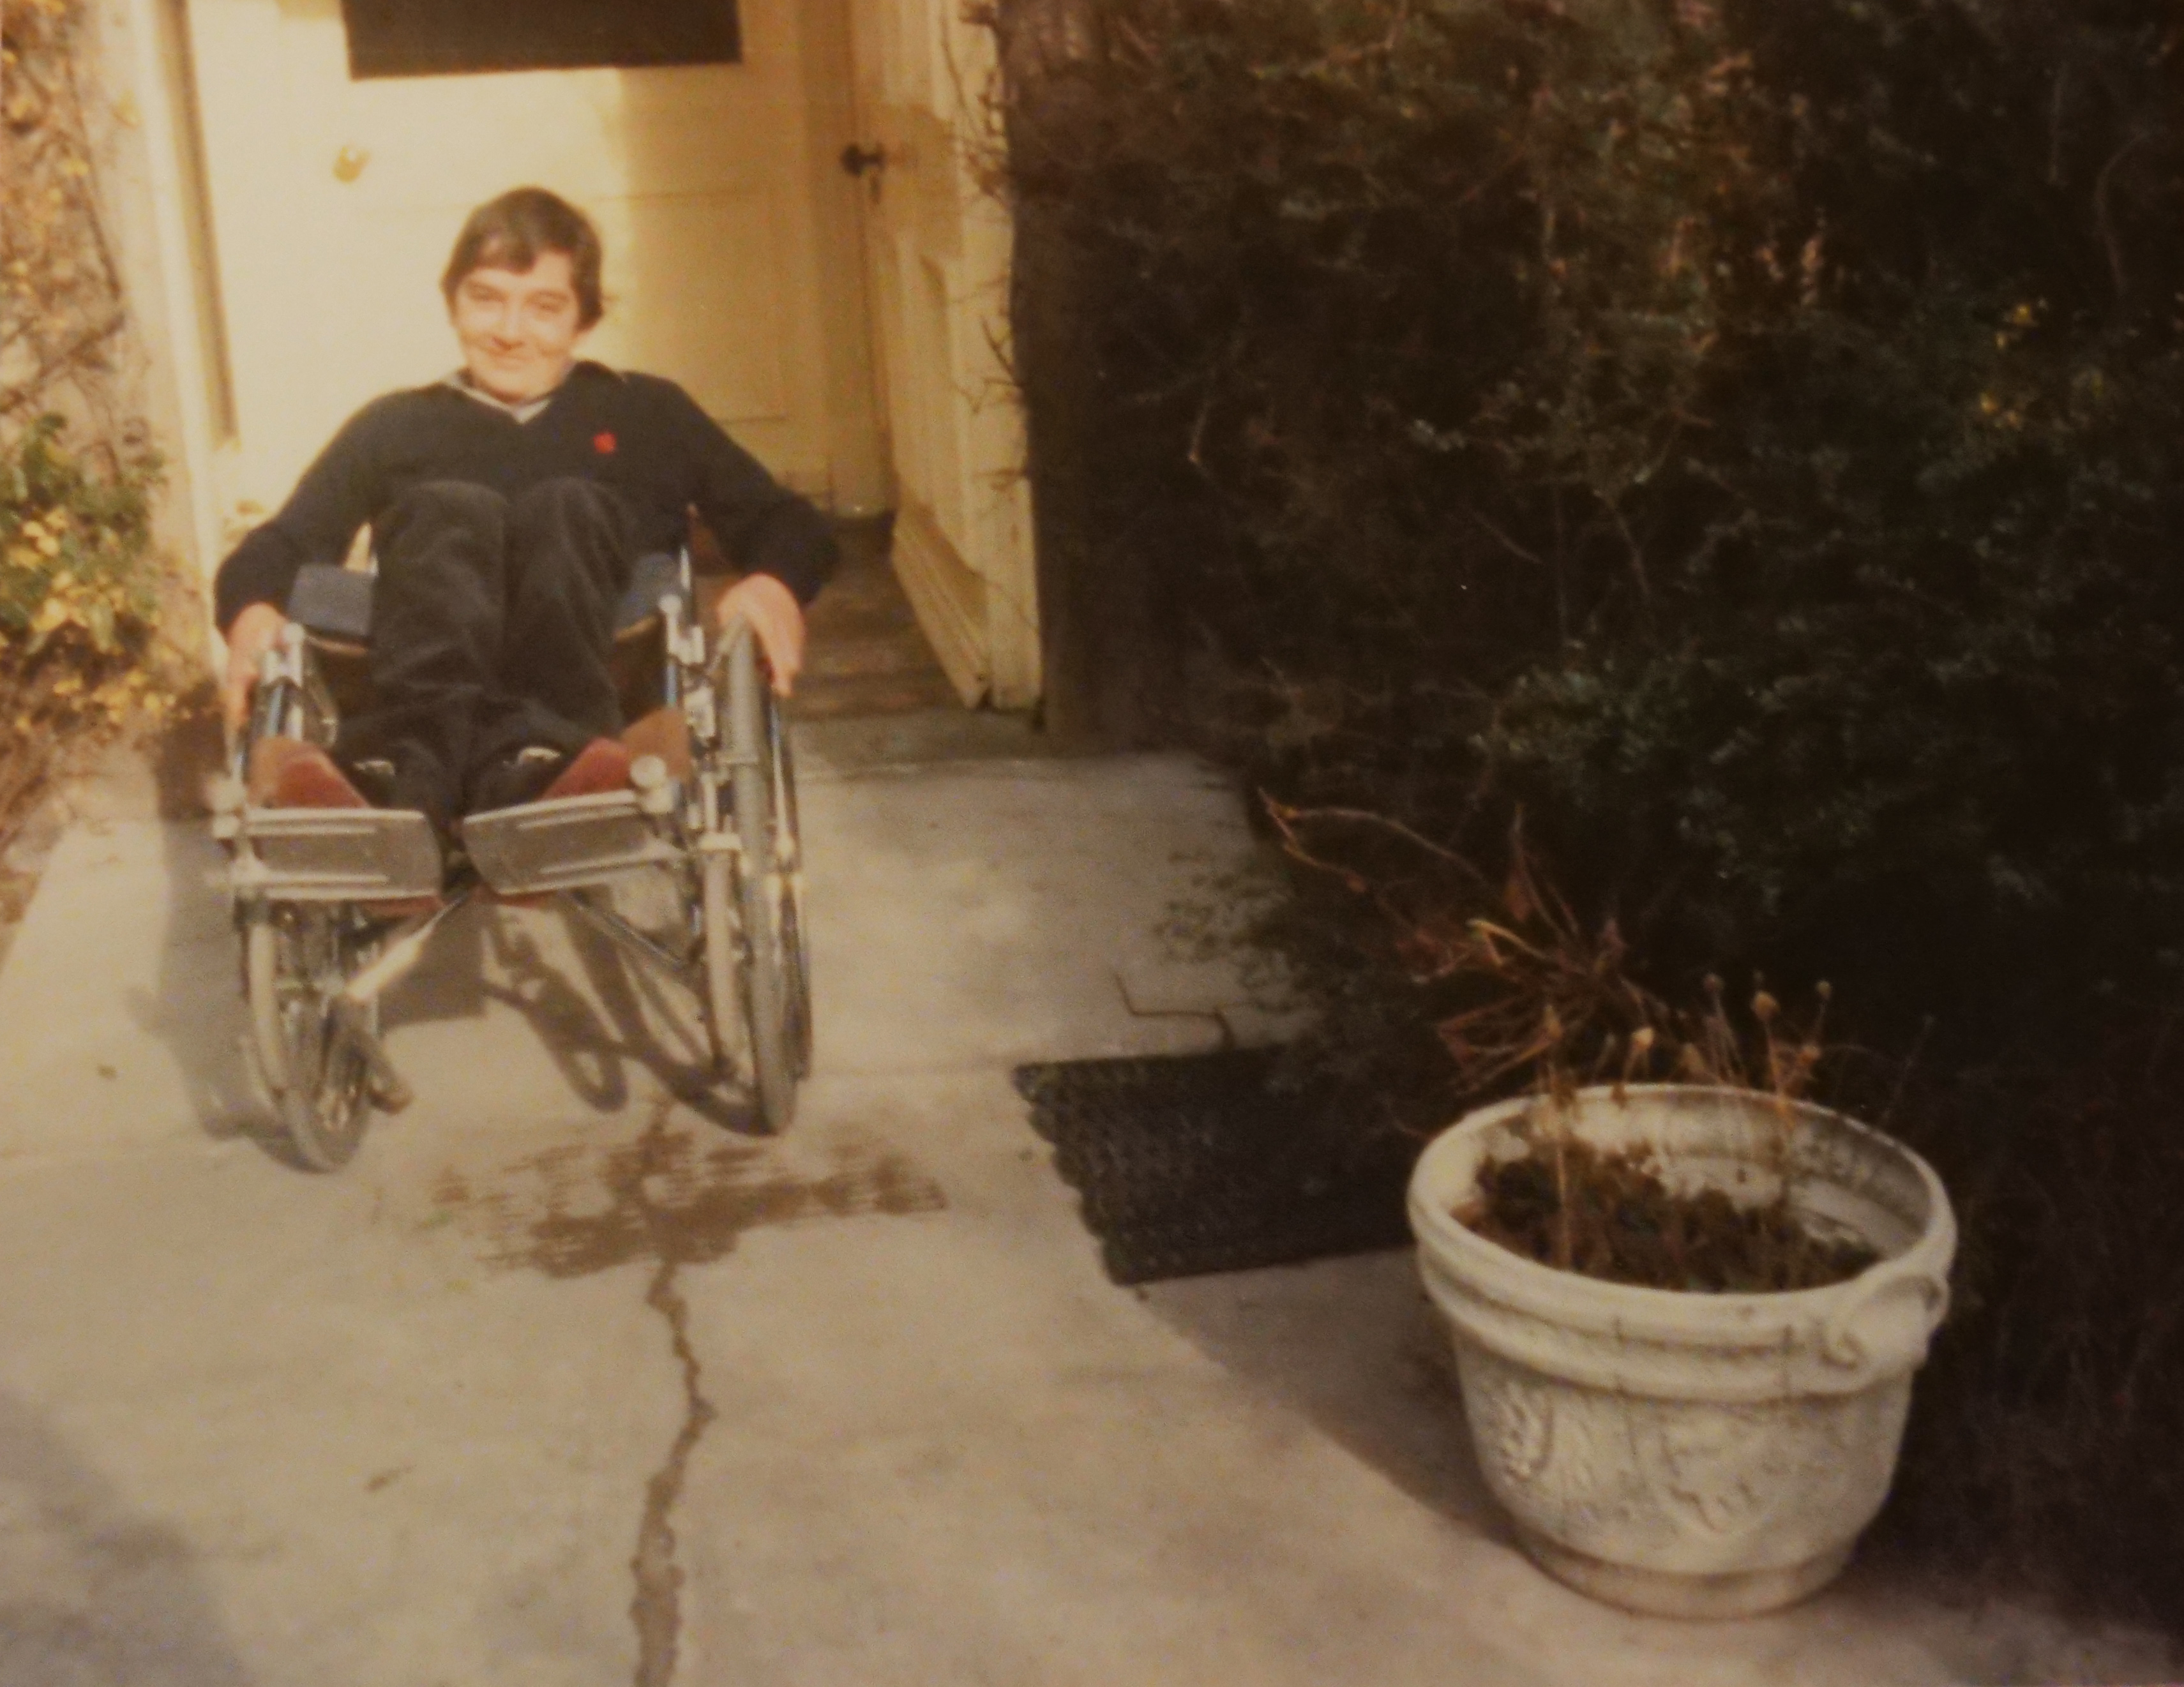 Andrew Slorance, founder of Phoenix Instinct, pictured in a wheelchair